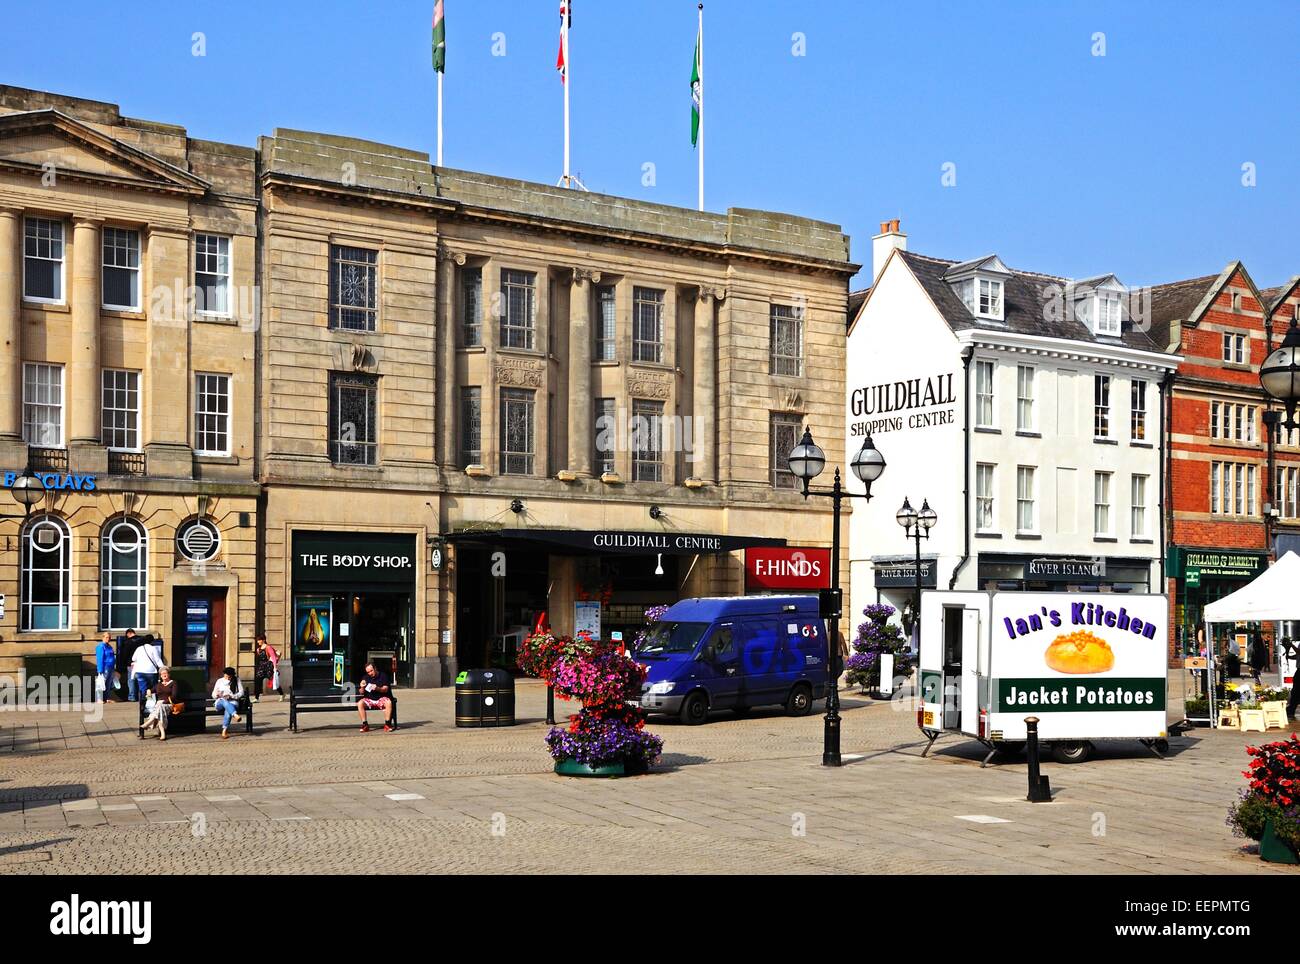 The Guildhall Centre in Market Square, Stafford, Staffordshire, England, UK, Western Europe. Stock Photo